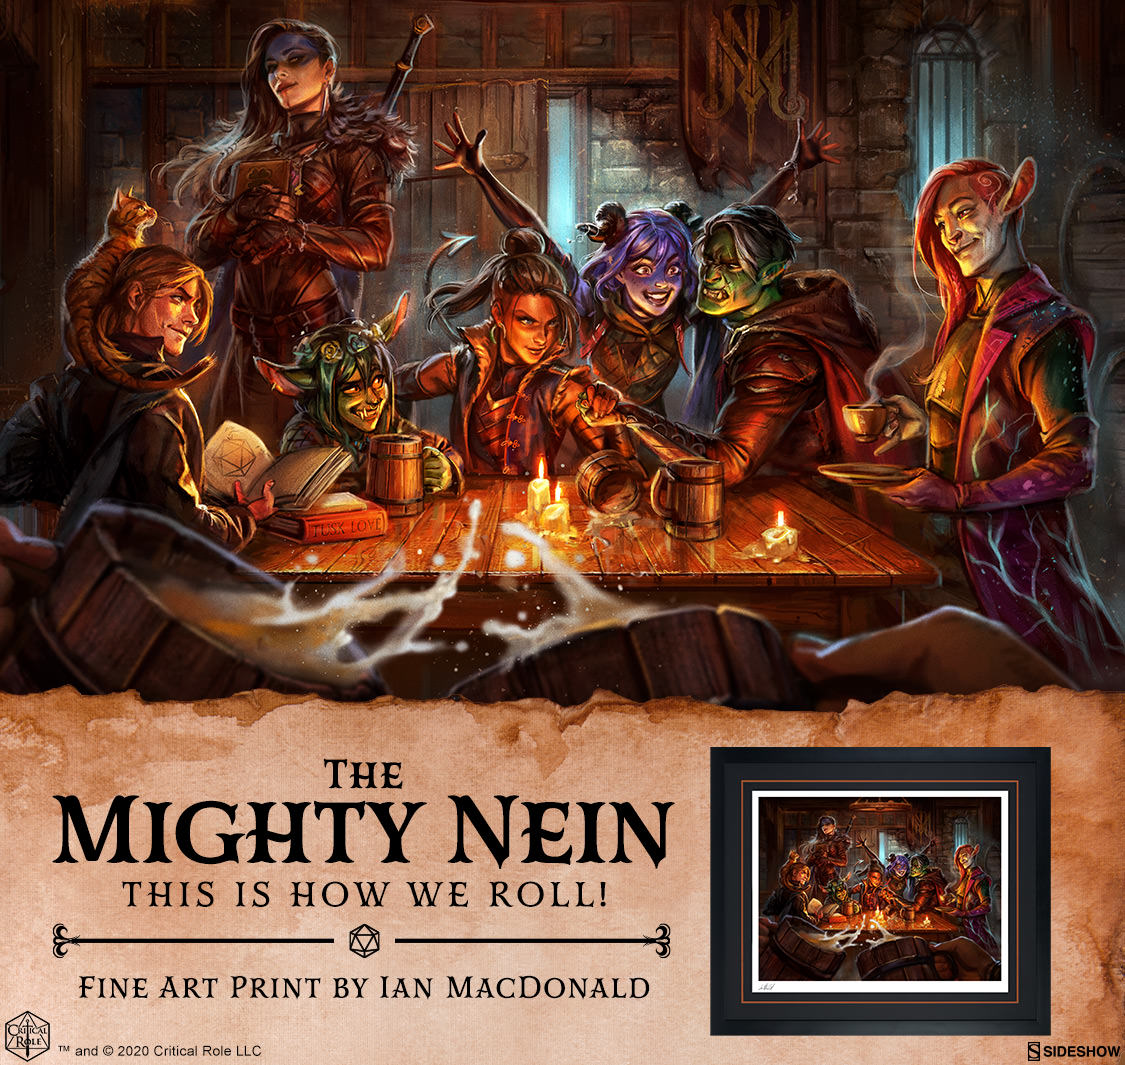 The Mighty Nein: This is How We Roll! by Ian MacDonald